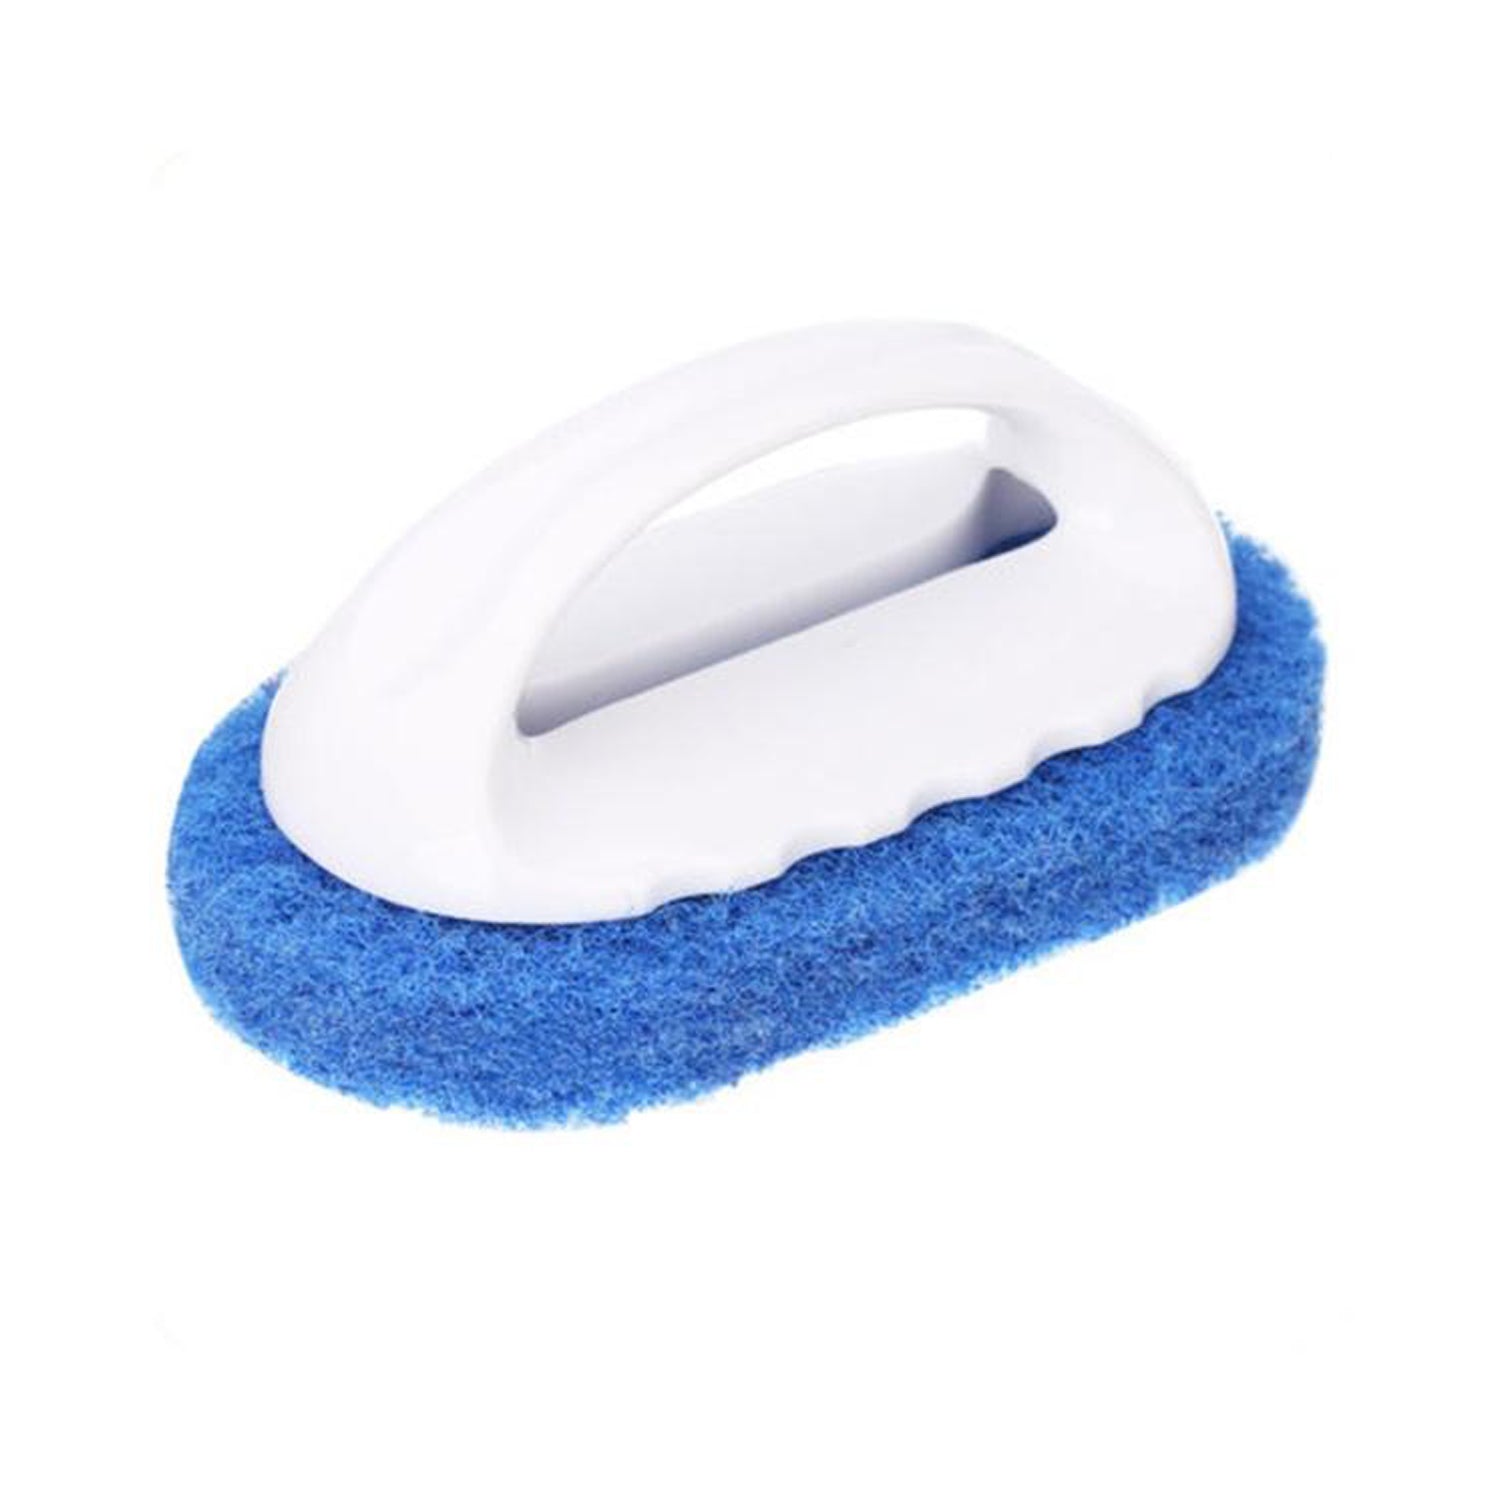 6145 Bath Cleaning Brush used for cleaning and washing of types of surfaces in bathroom, kitchen etc.